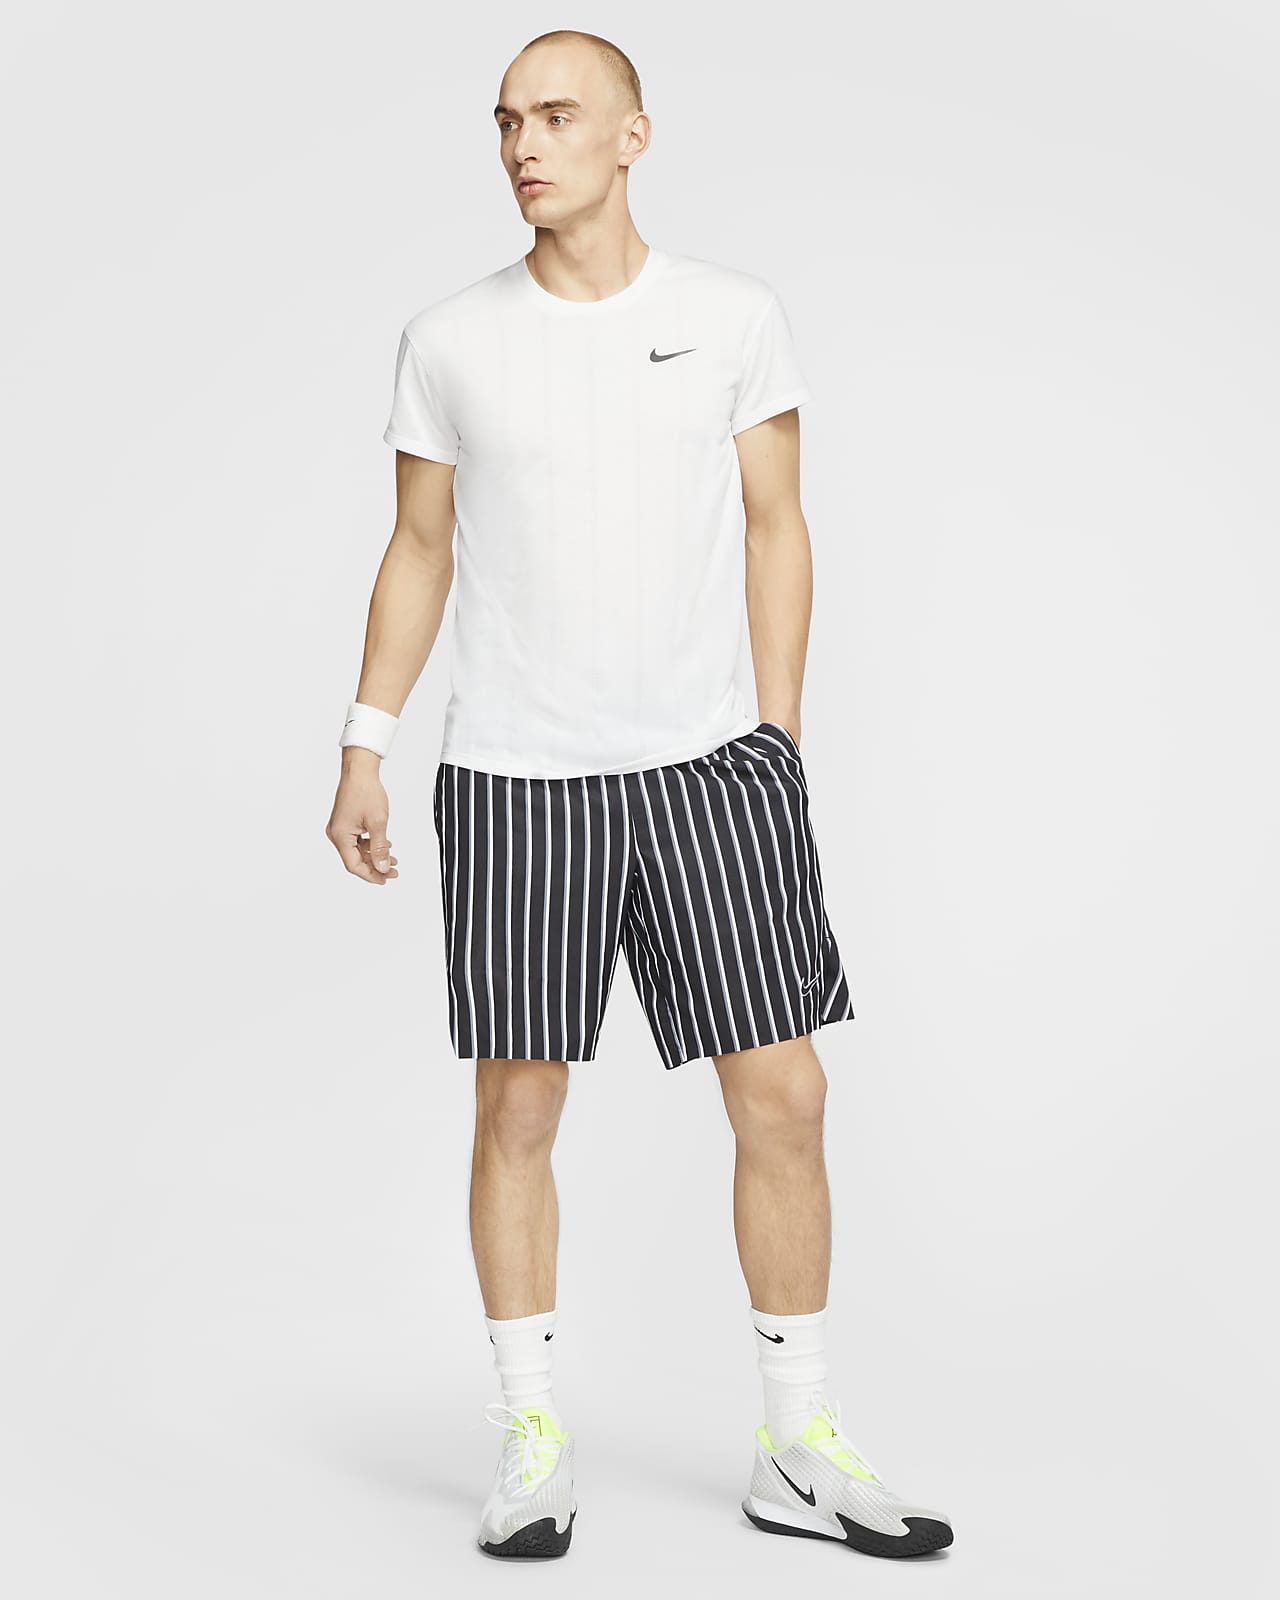 tennis outfit nike